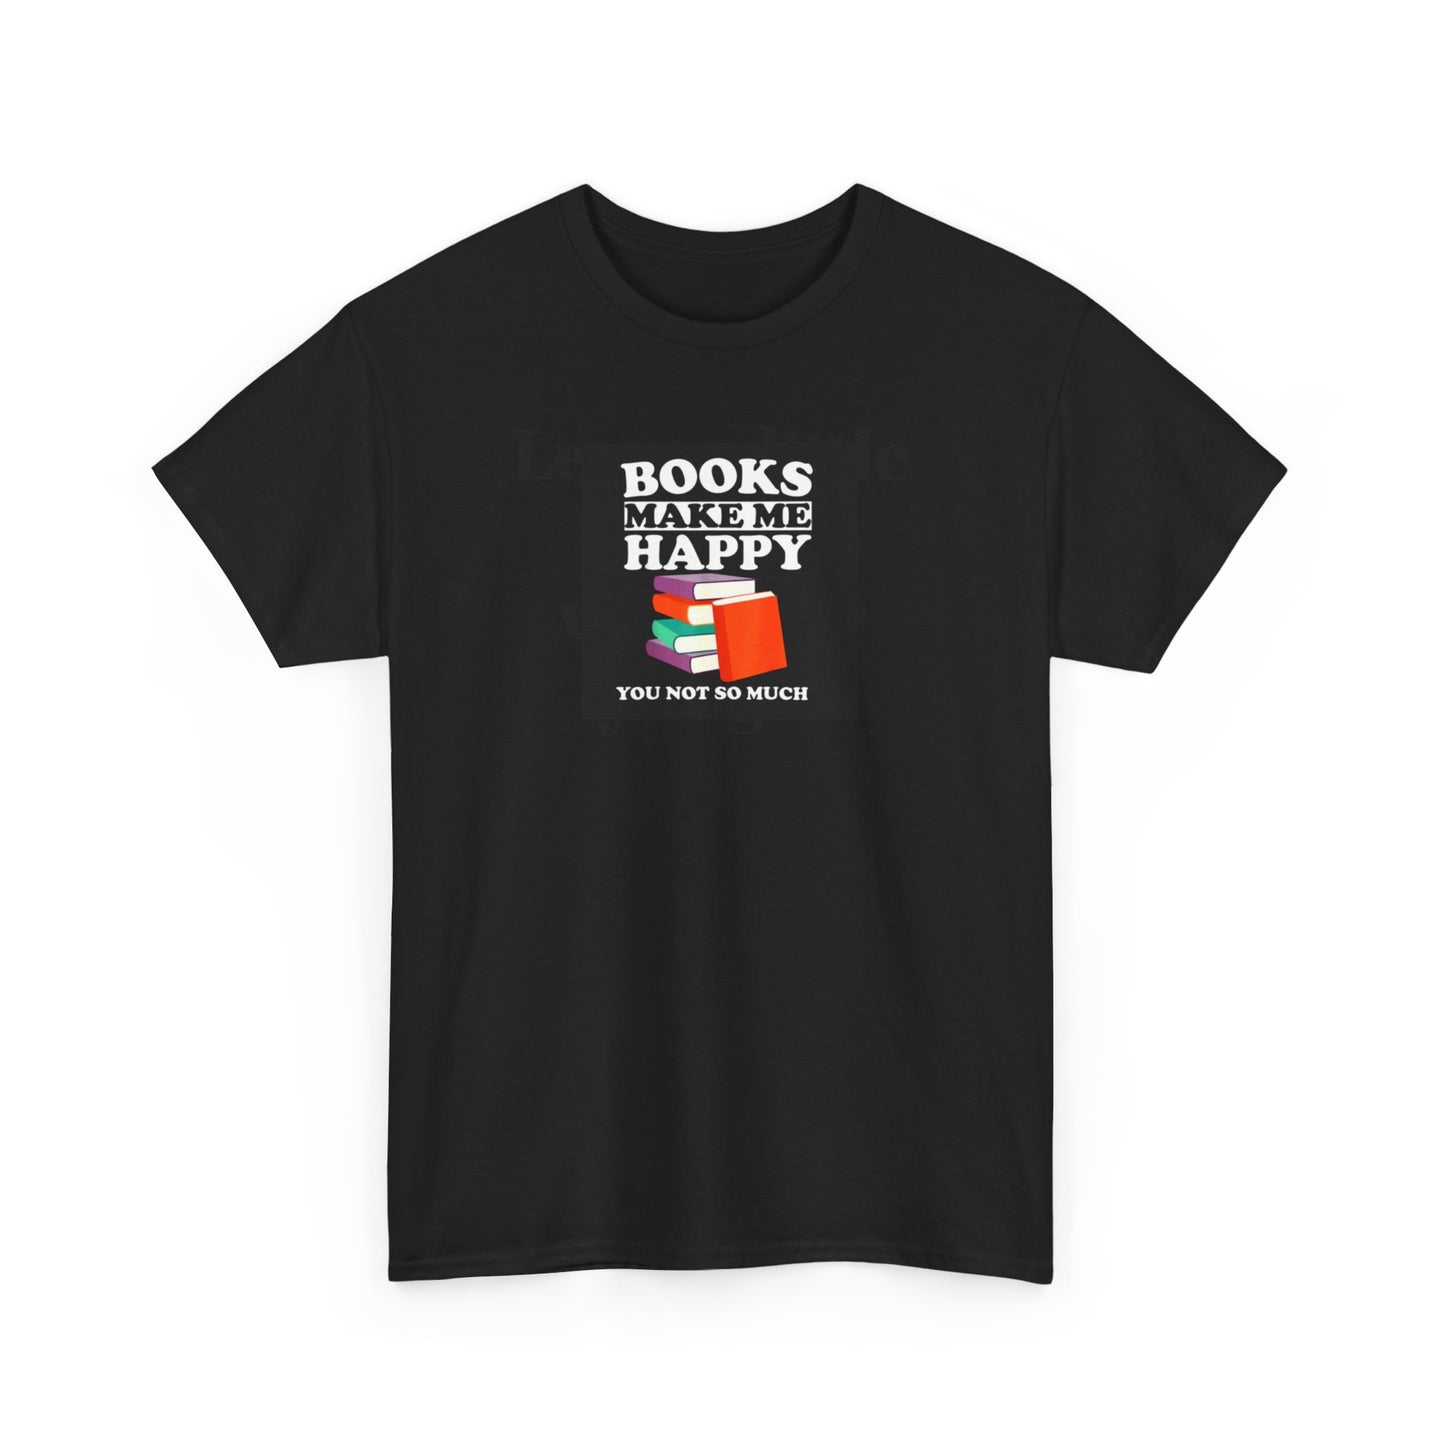 Book Lovers T-Shirt, Books Make Me Happy, You Not So Much!